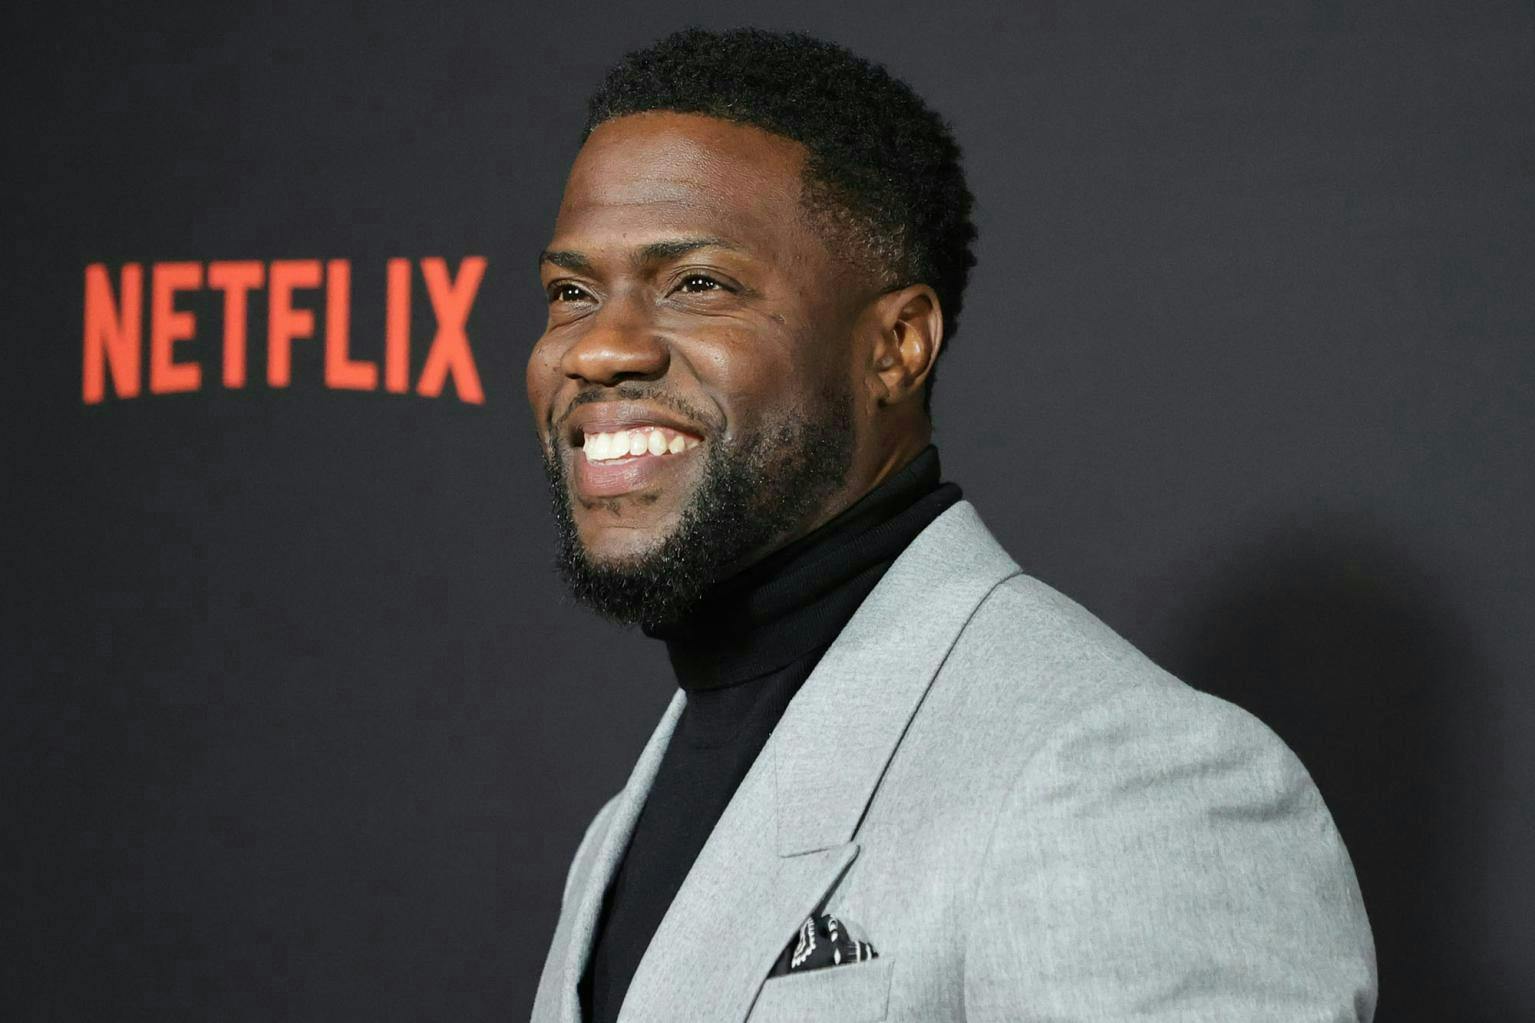 Kevin Hart Net Worth as One of the Highest Paid Comedians — Kevin Hart